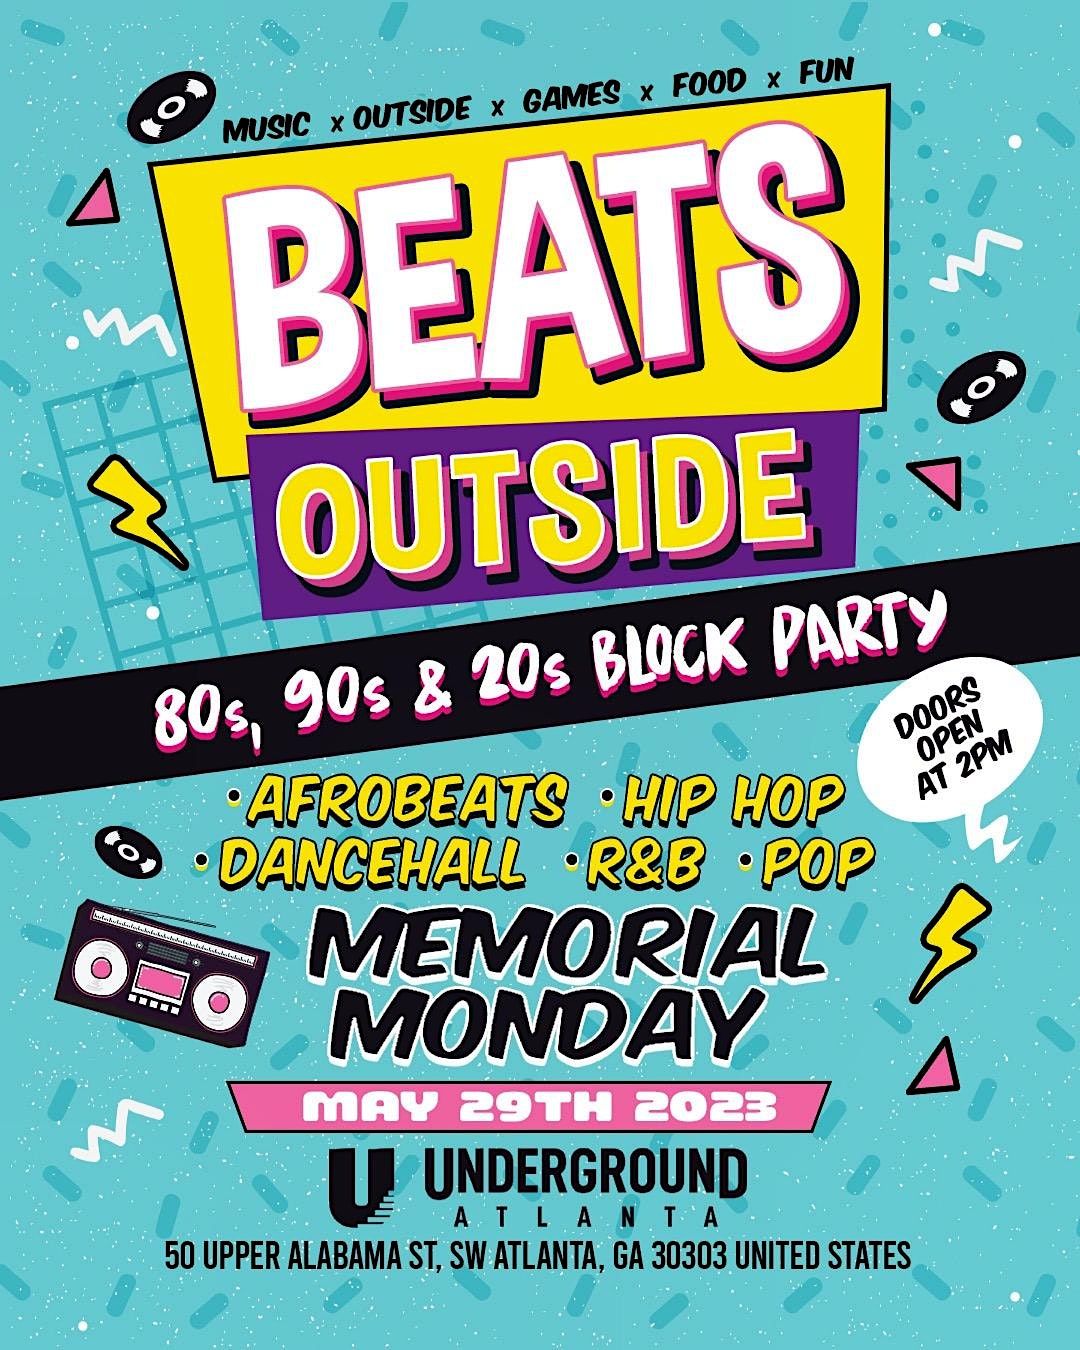 Beats Outside - Block Party at the Underground - Mon May 29